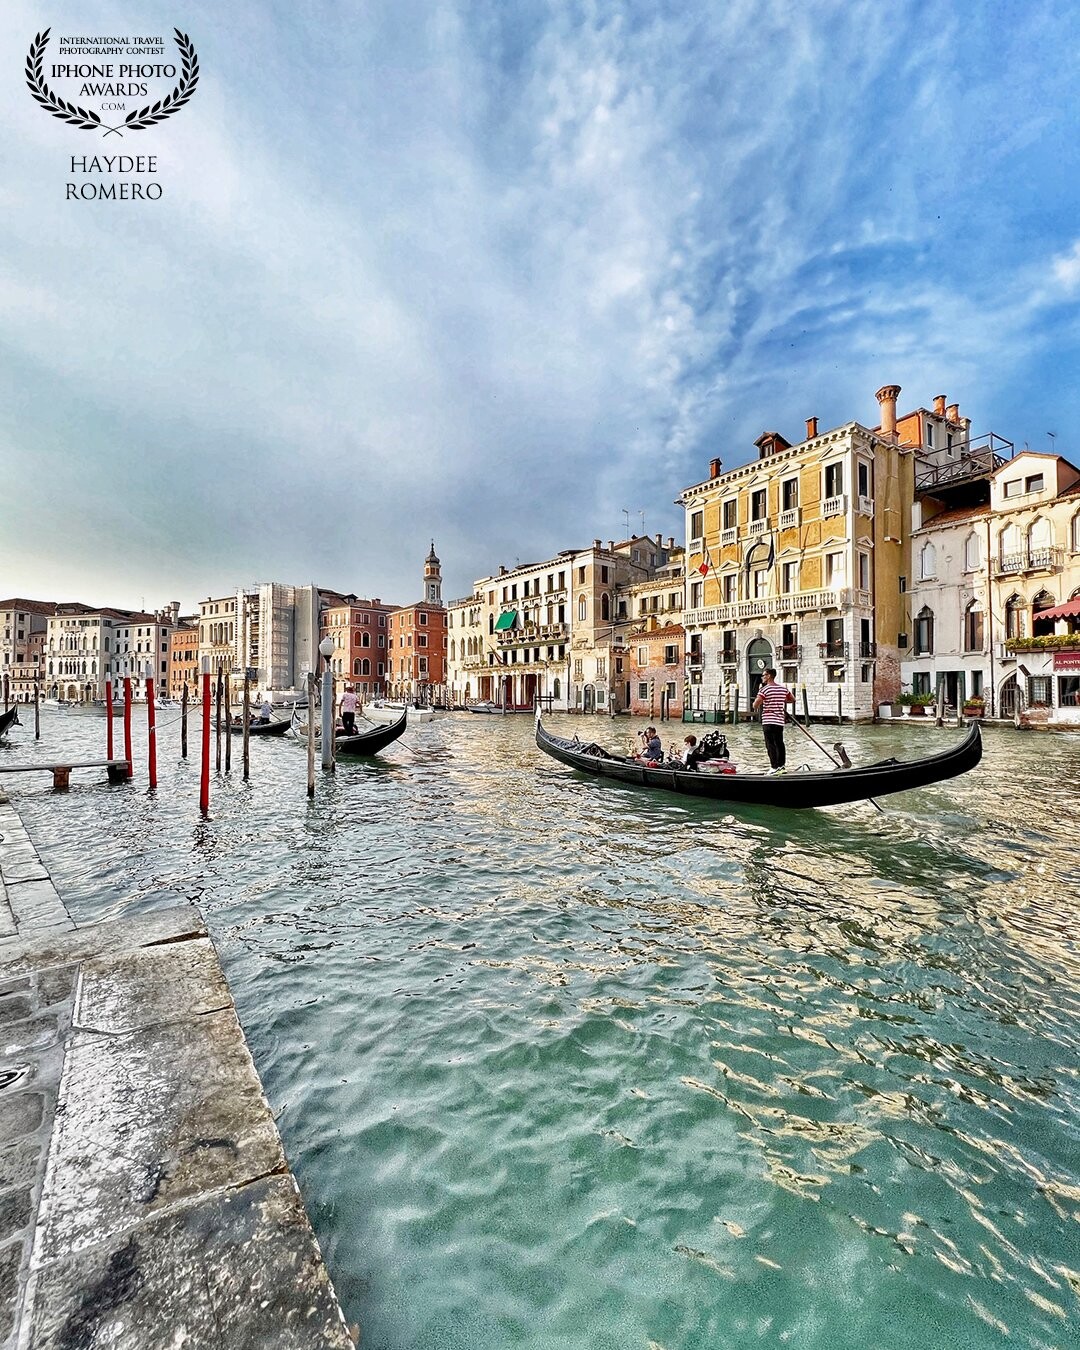 The Grand Canal is the main waterway of Venice, It is built on a group of 118 small islands that are separated by canals and linked by over 400 bridges.